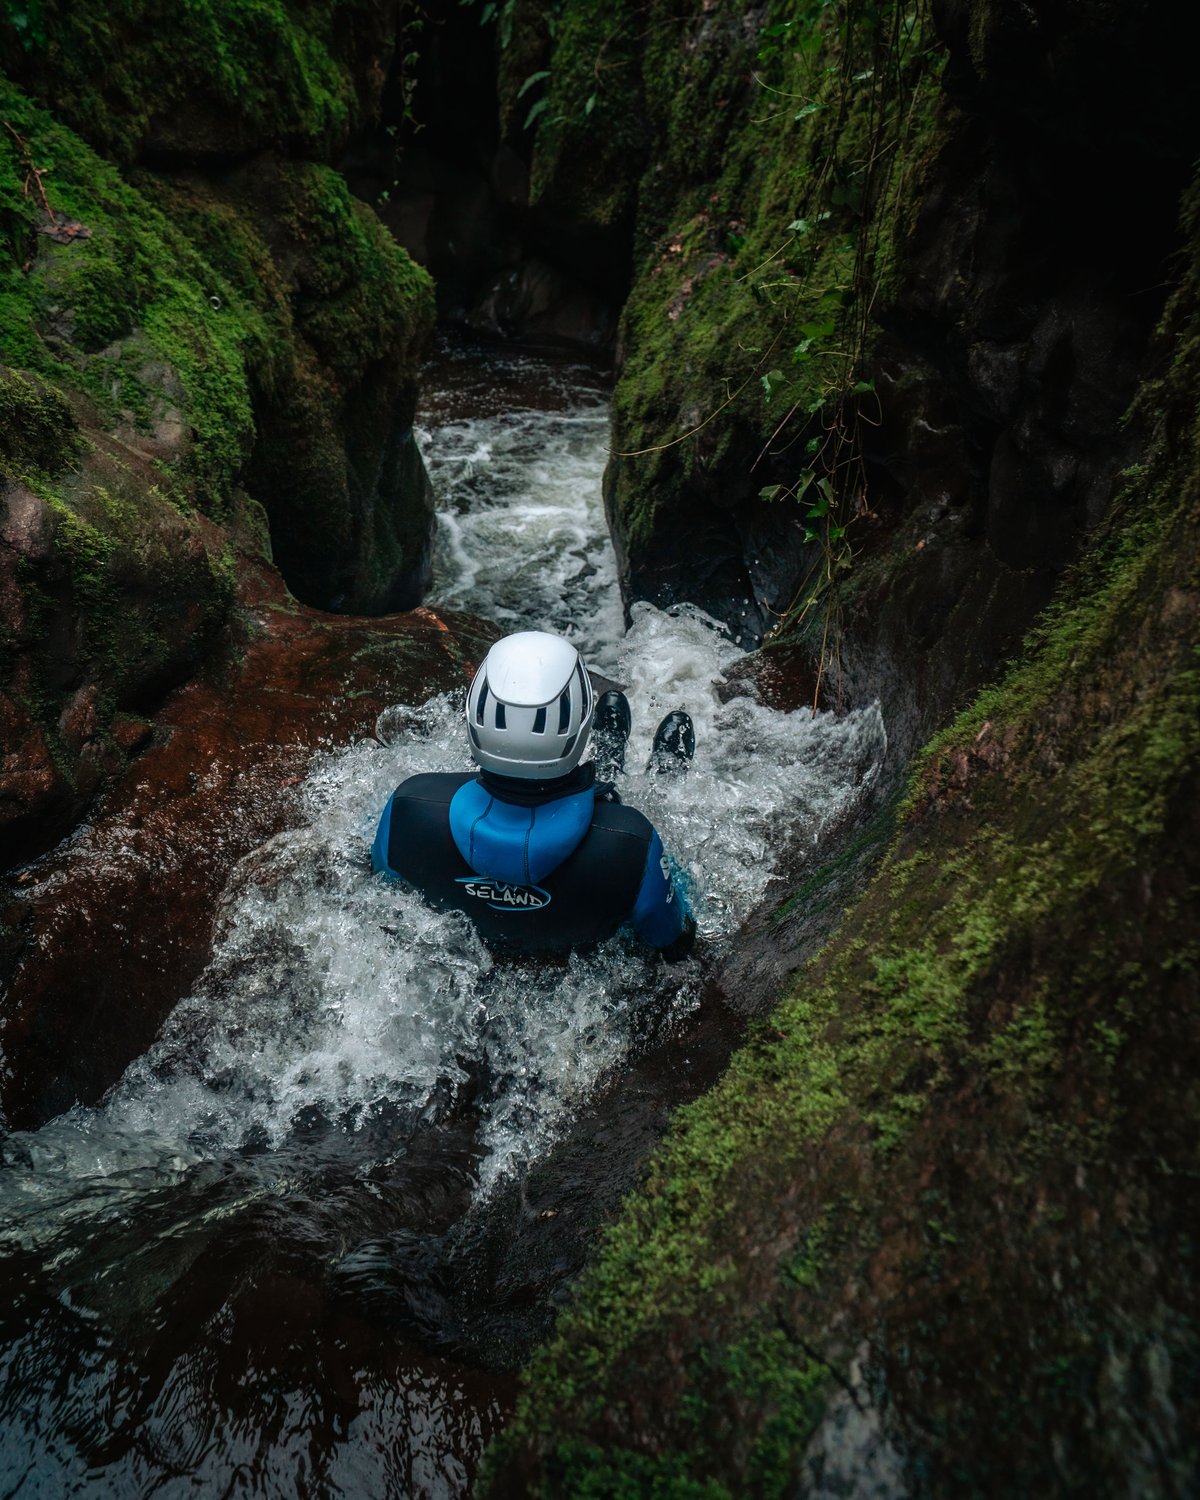 Canyoning guest slides into beutiful canyon pool surrounded by moss covered rocks in Dollar Glen